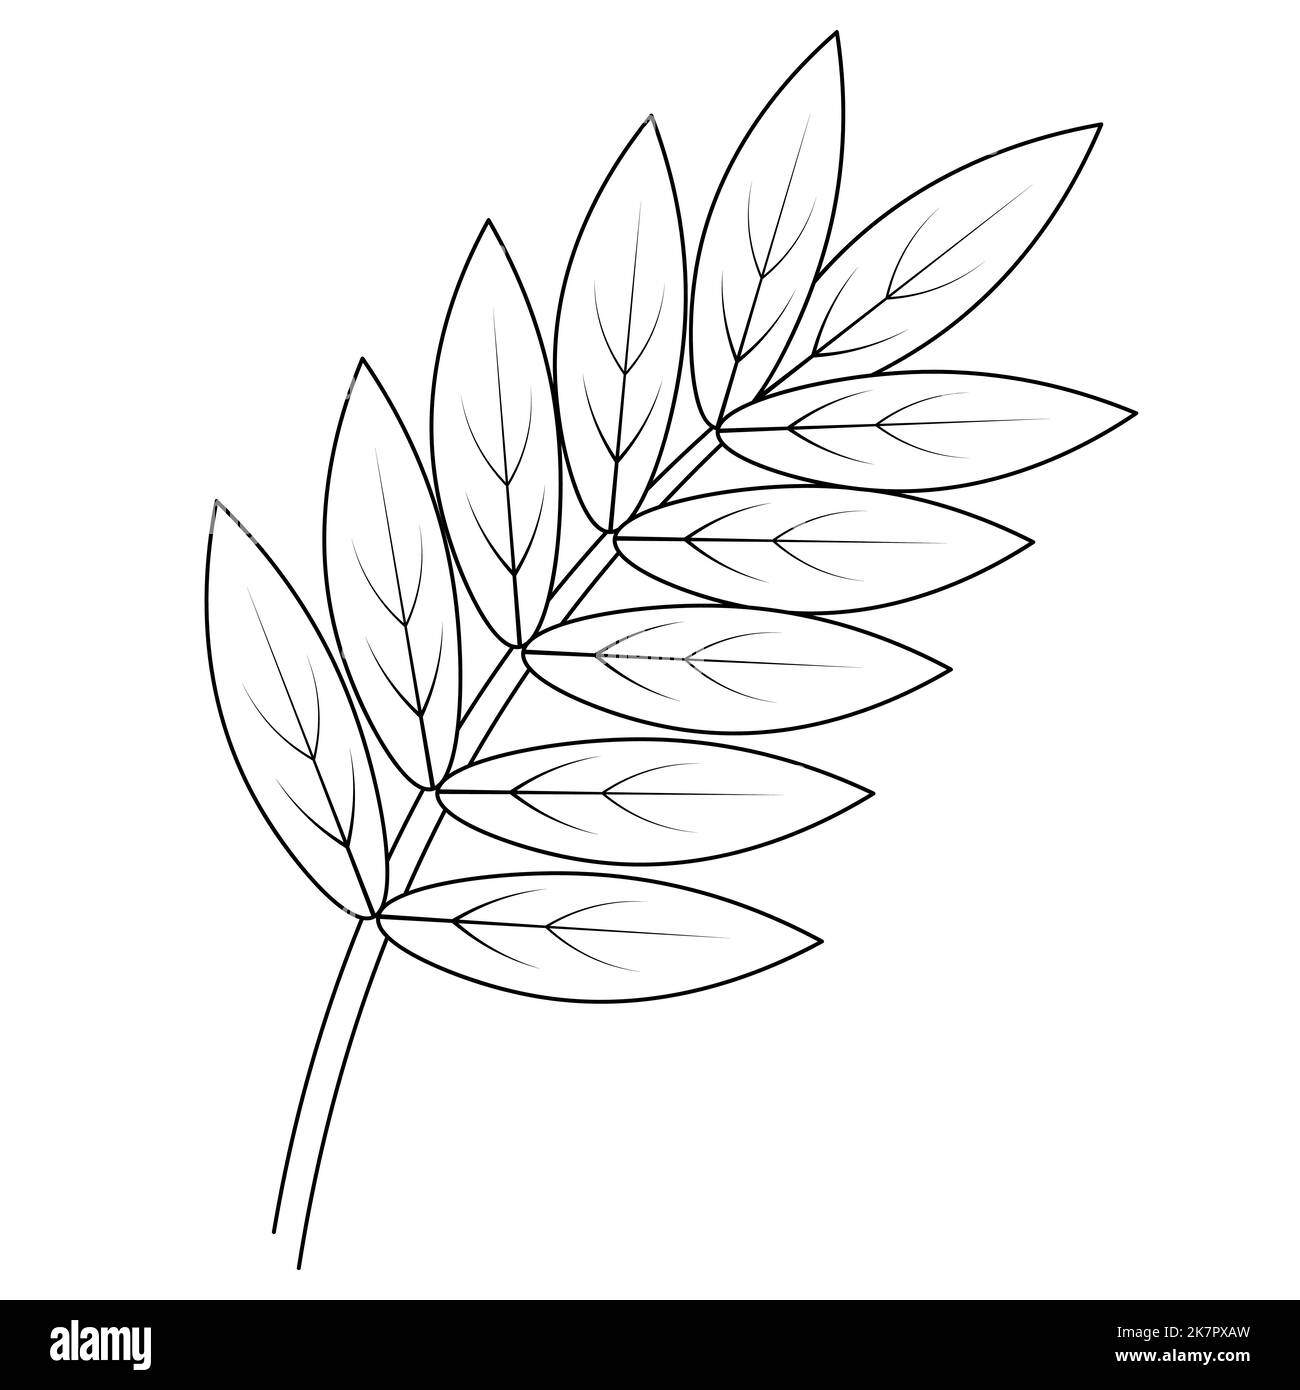 Rowan leaf. Part of the tree with veins. Vector illustration. Outline on an isolated white background. Doodle style. Sketch. Coloring book Stock Vector